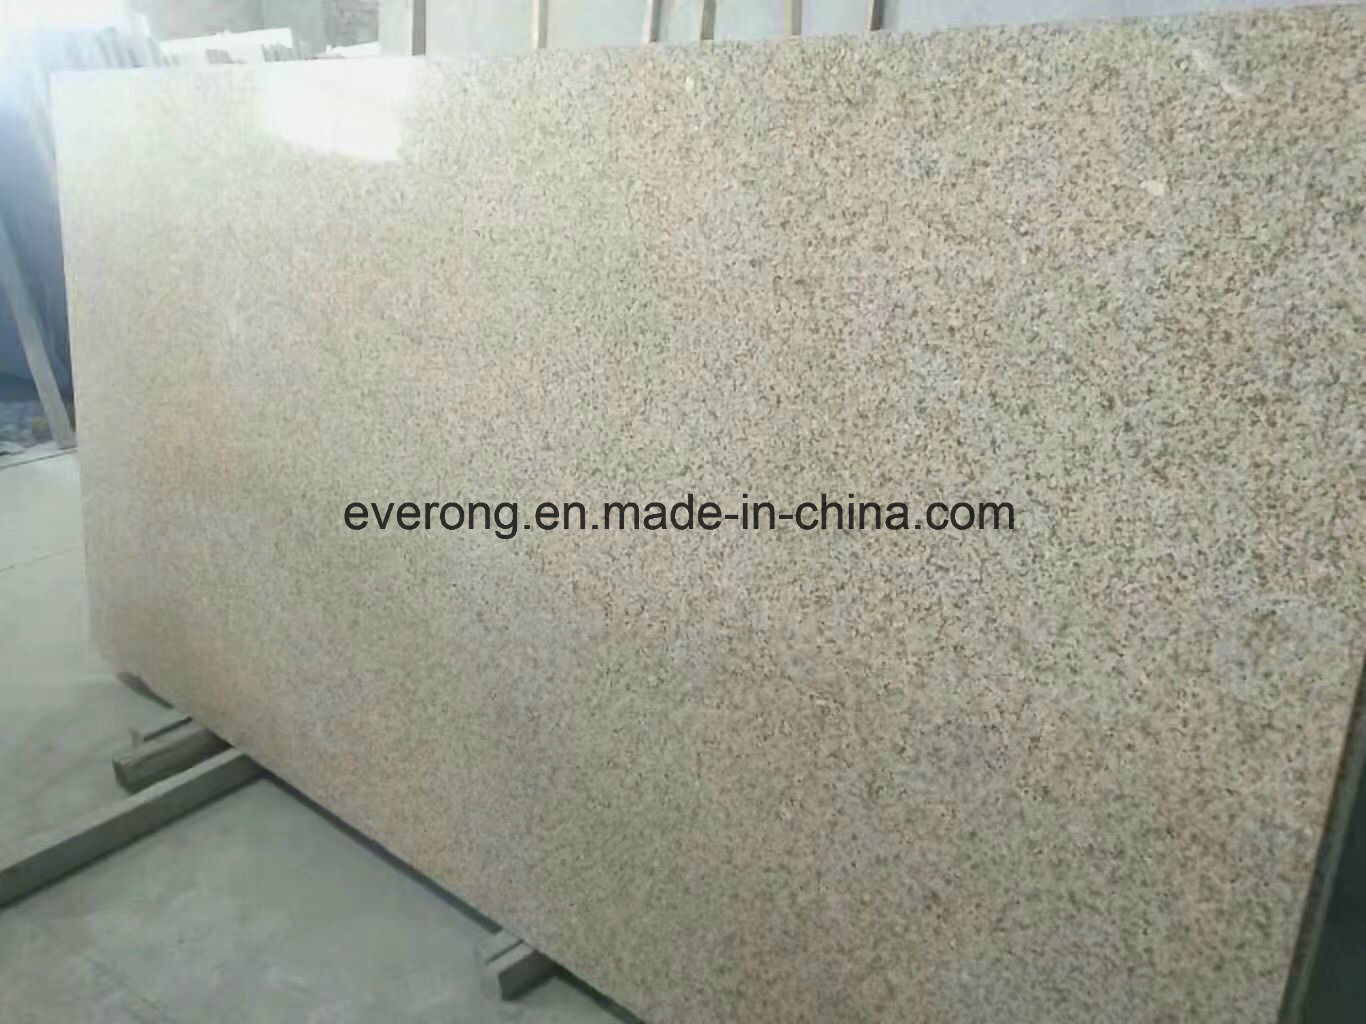 G682 Rusty Yellow, Misty Yellow, Sunset Gold Granite Slab for Floor/Wall Tile &Countertop